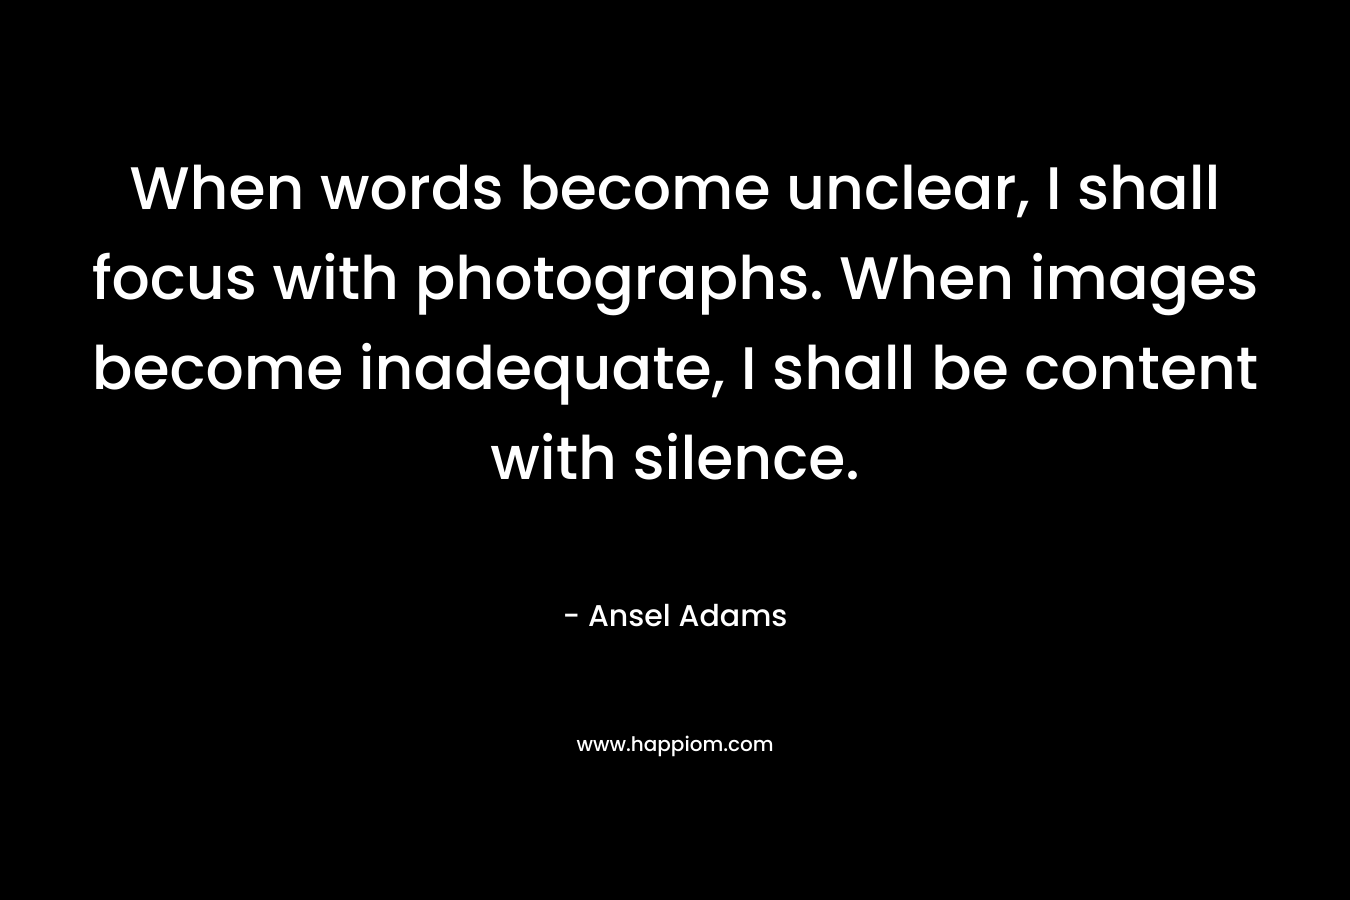 When words become unclear, I shall focus with photographs. When images become inadequate, I shall be content with silence. – Ansel Adams